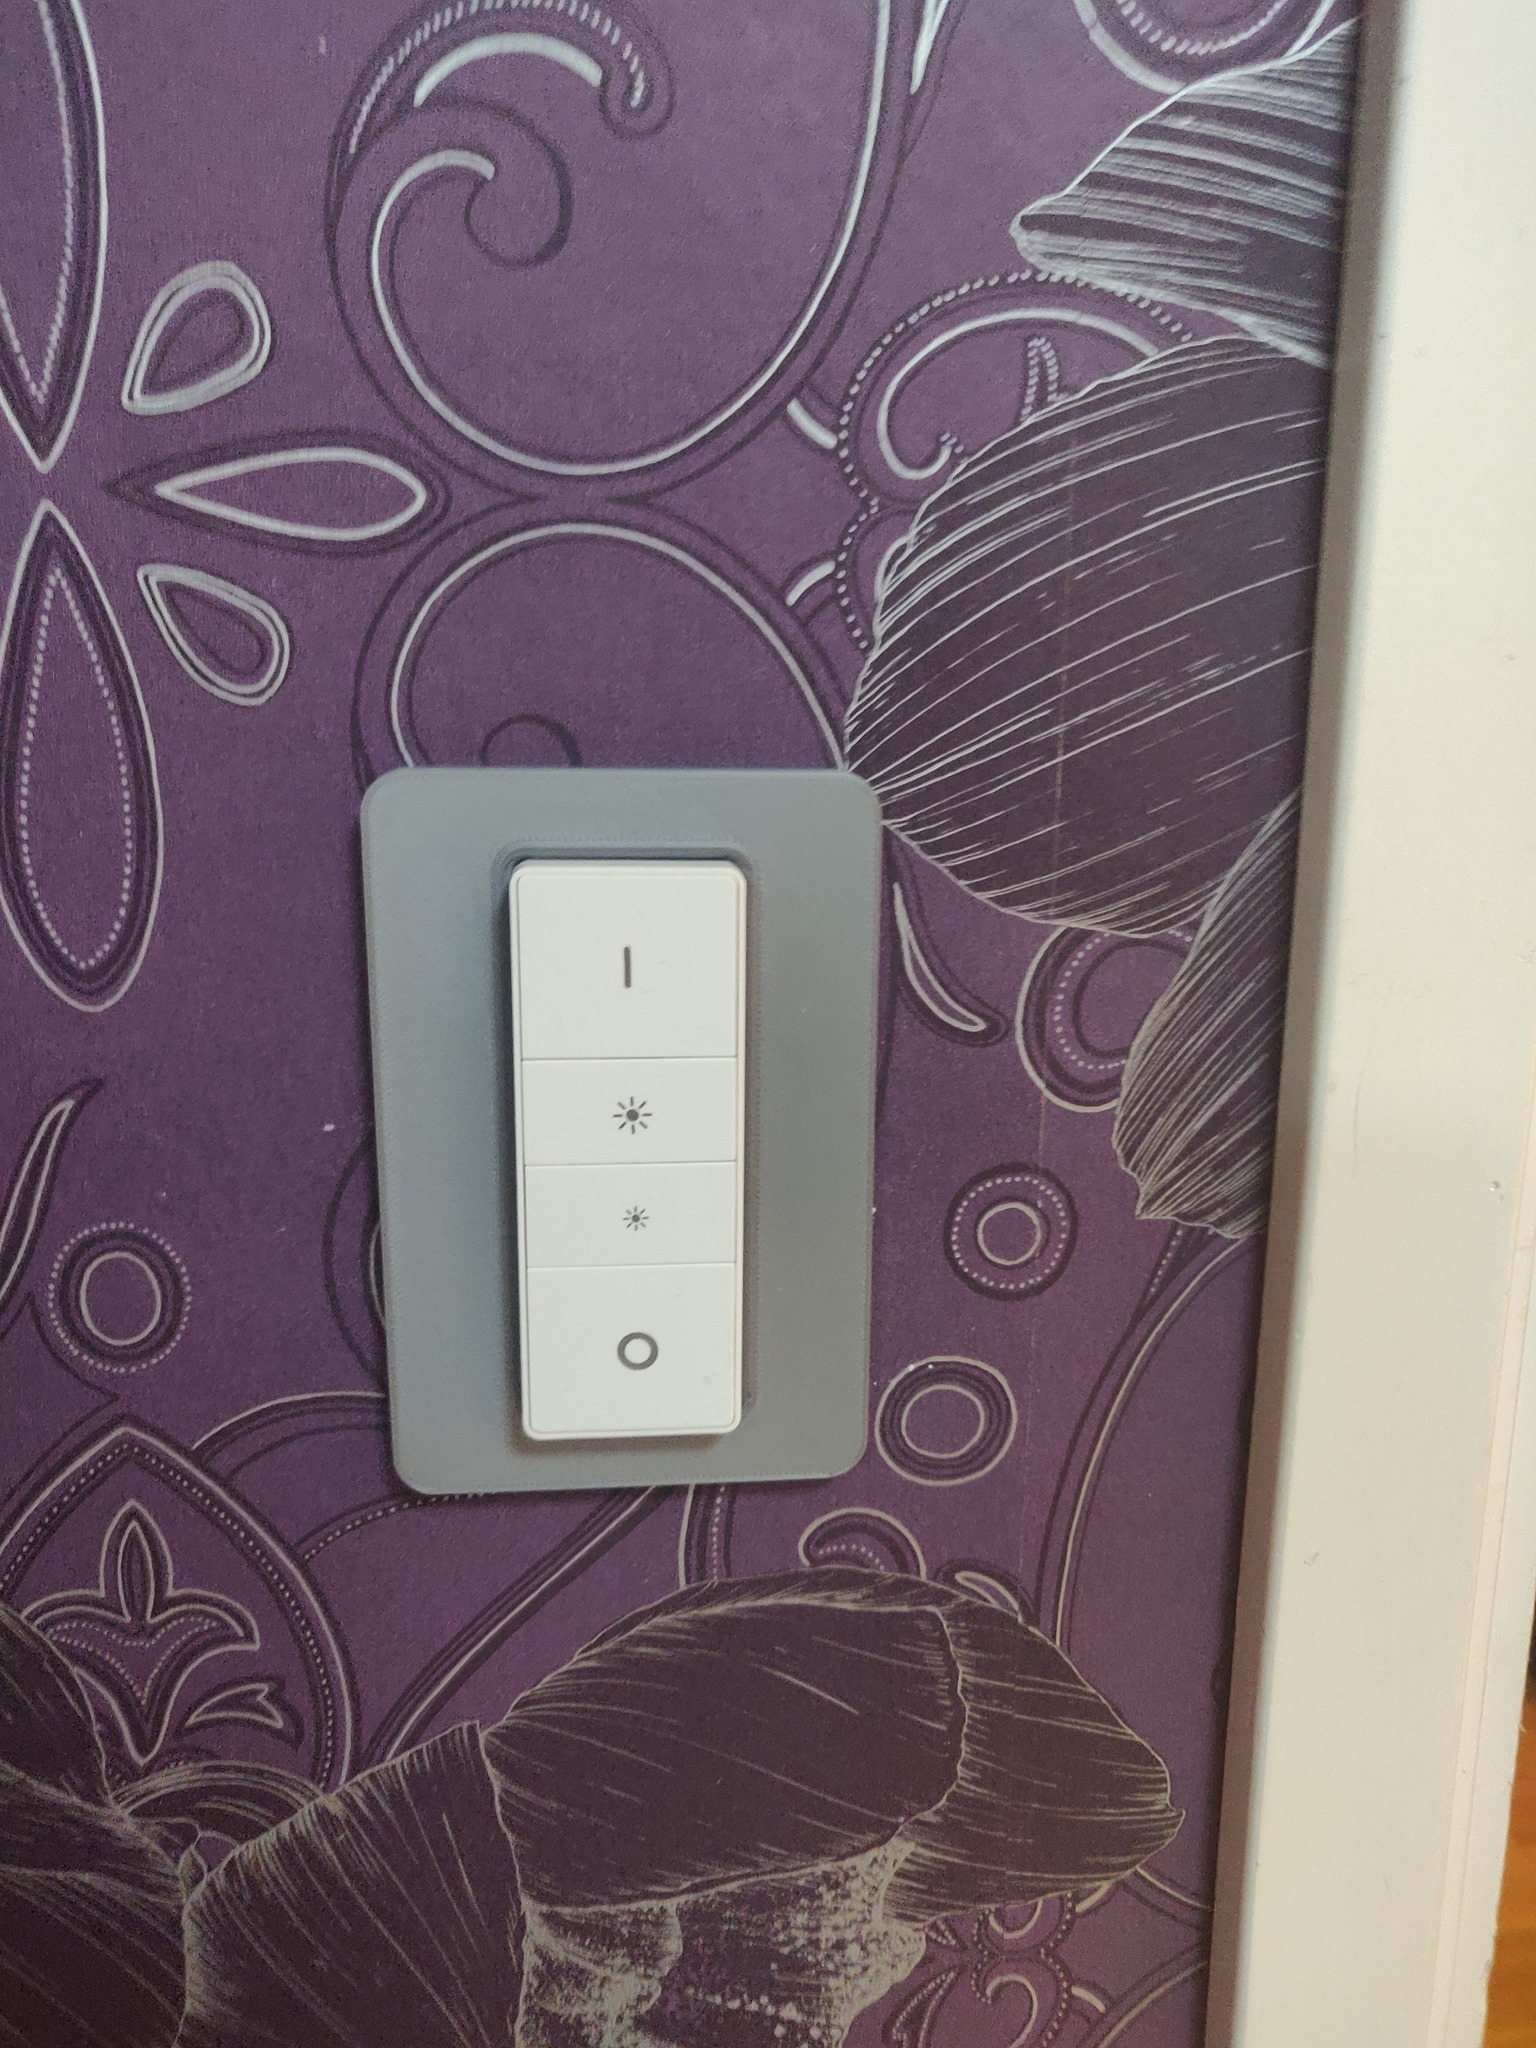 Hue dimmer switch mount cover